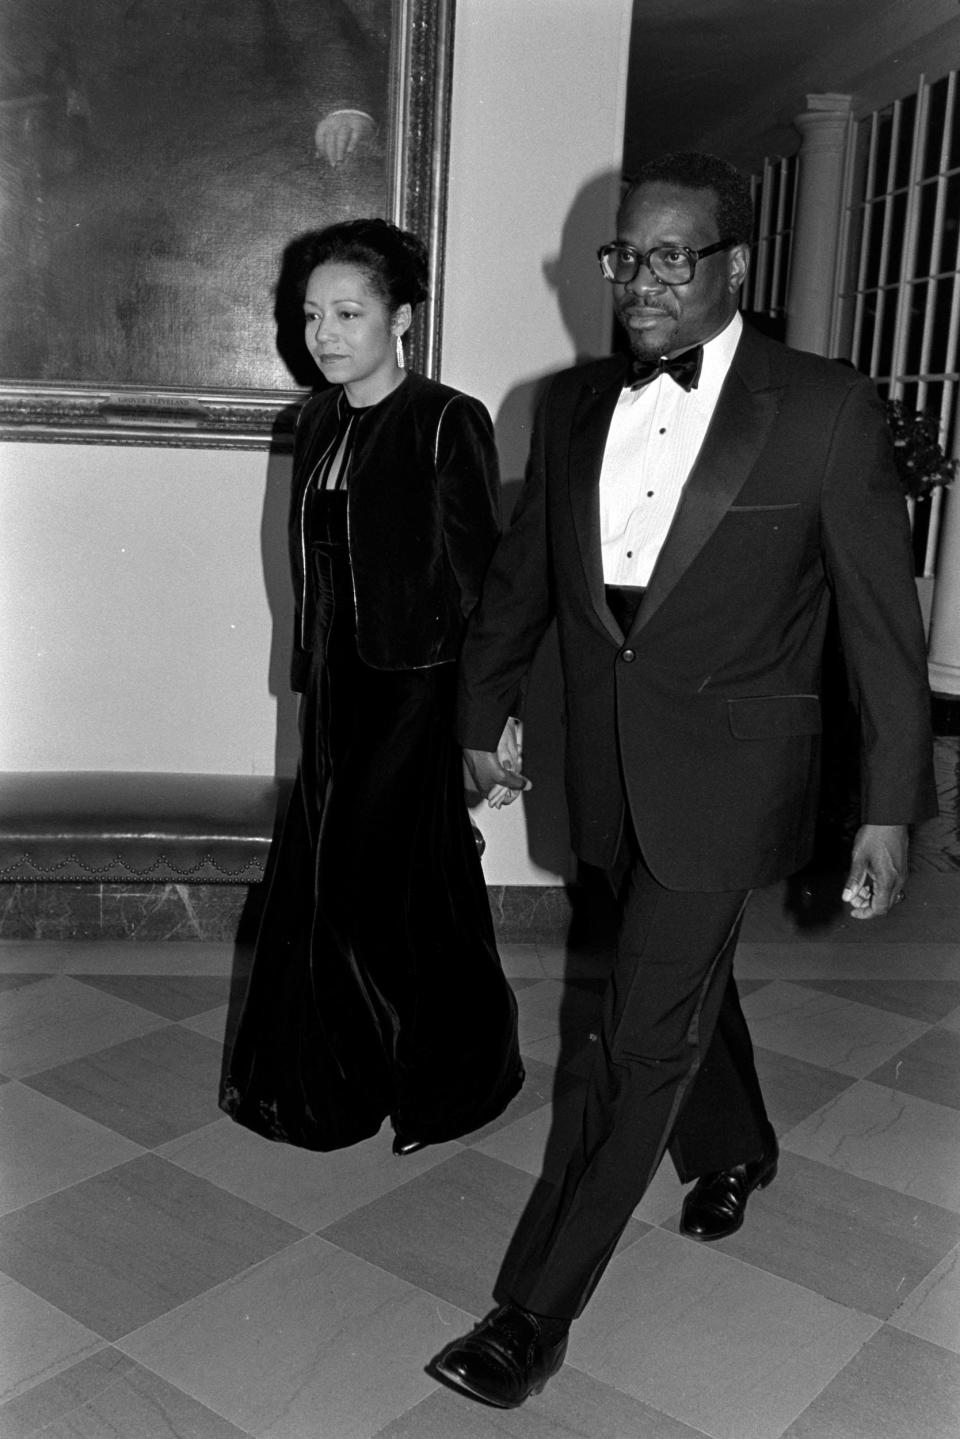 Kathy Ambush and Clarence Thomas attend an event at the White House in Washington, D.C., on March 19, 1985.